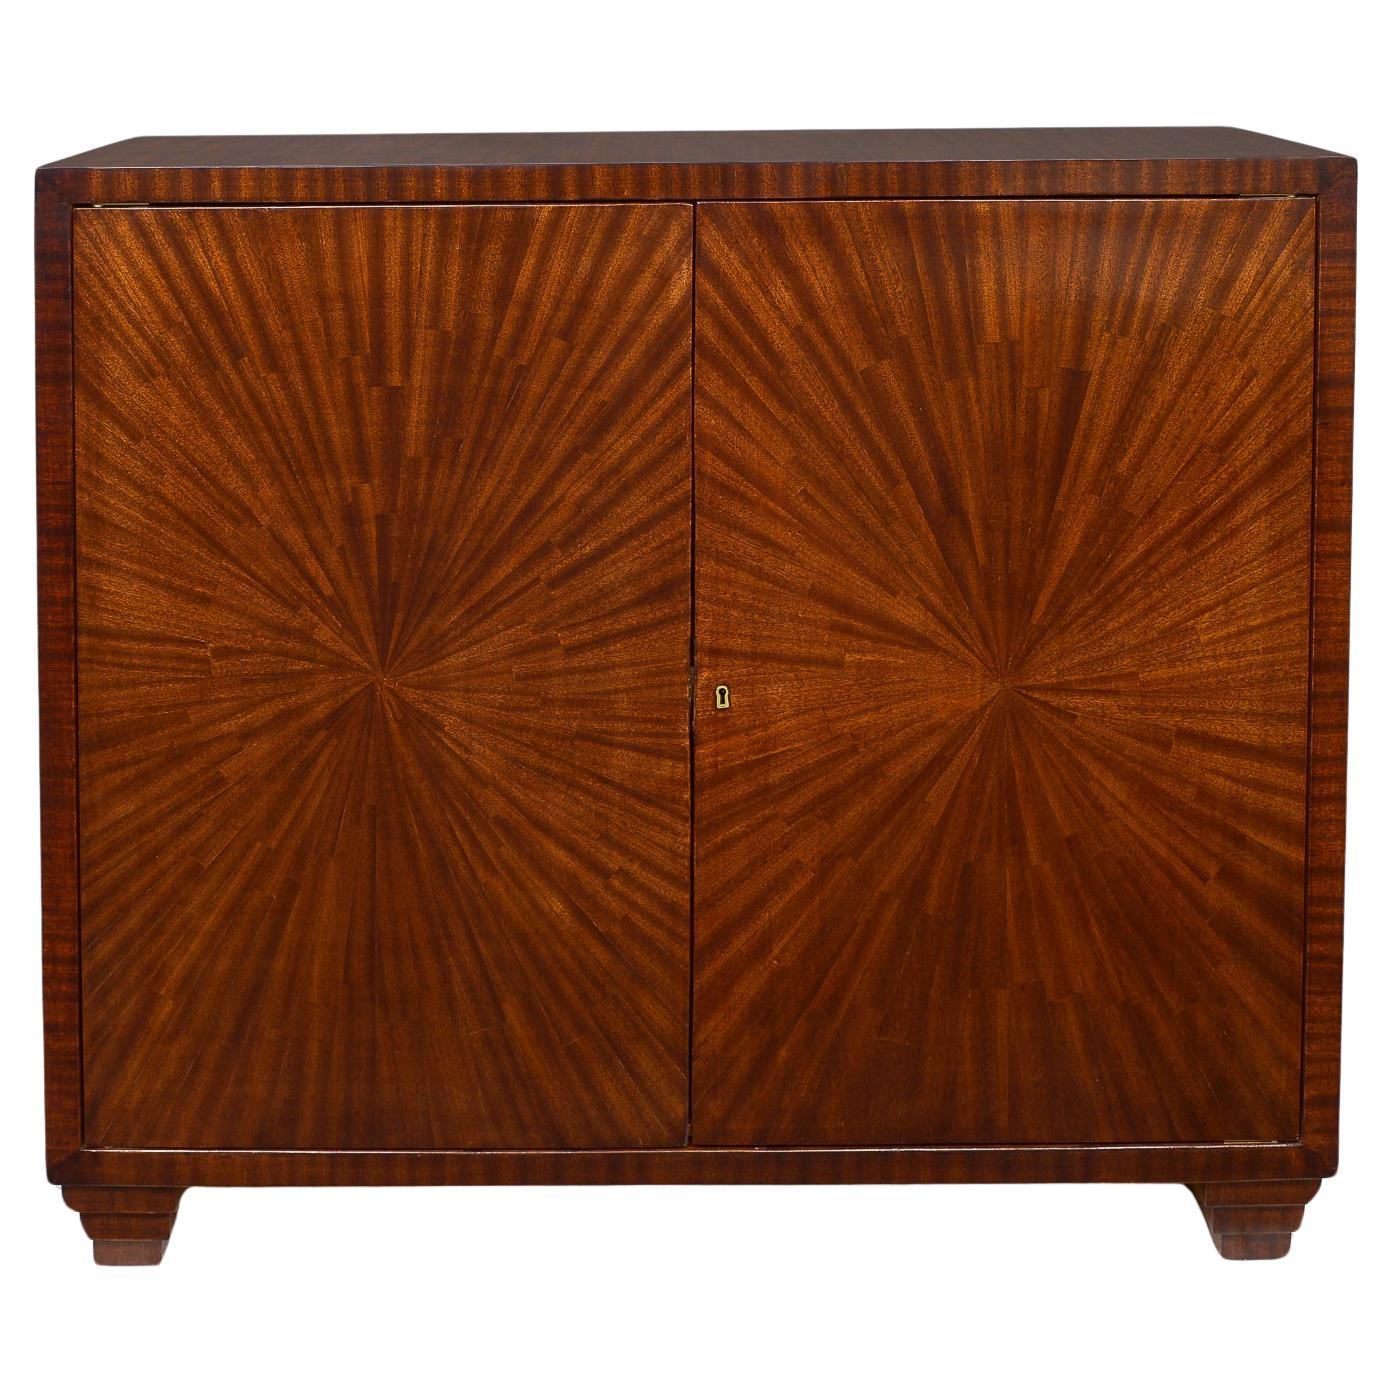 Exquisite Parquetry Cabinet with Starburst Pattern For Sale